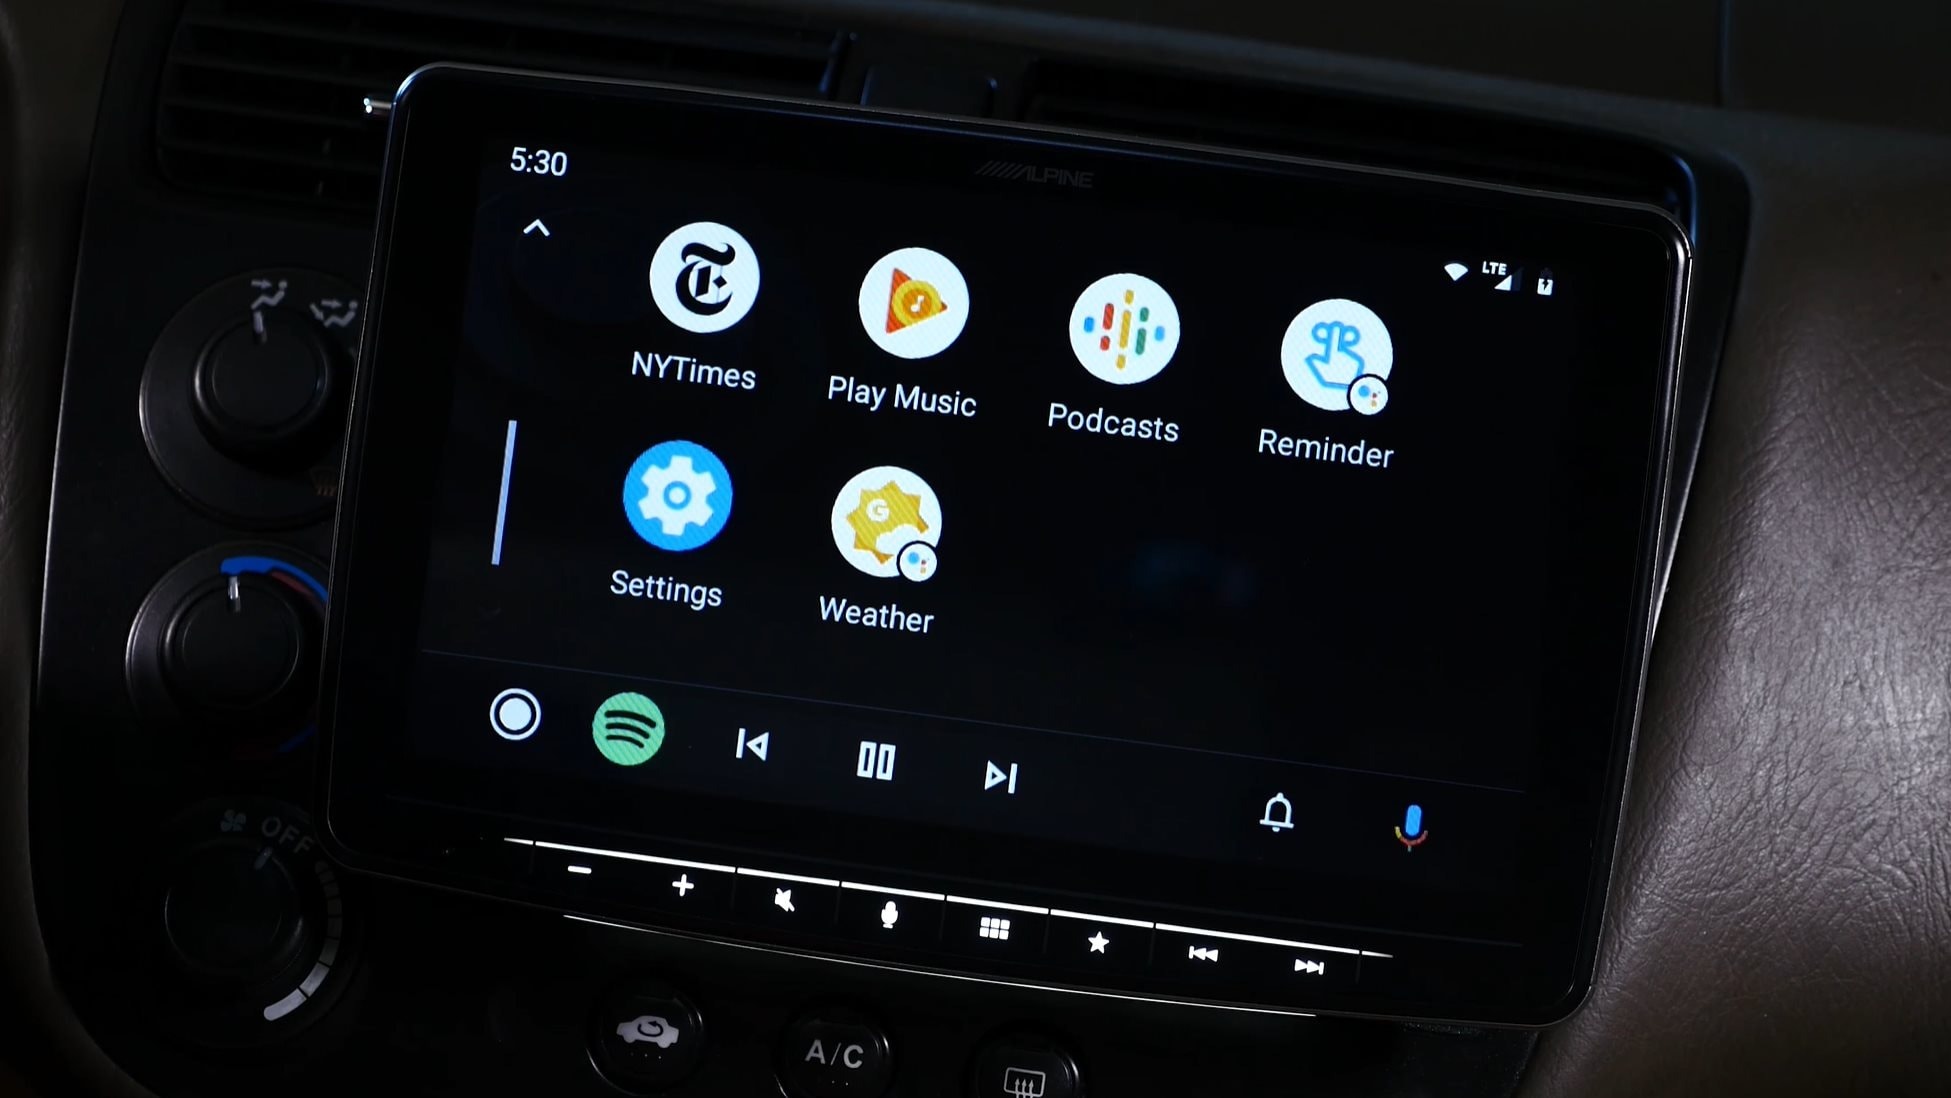 Top 5 reasons to look for Apple CarPlay and Android Auto in a new